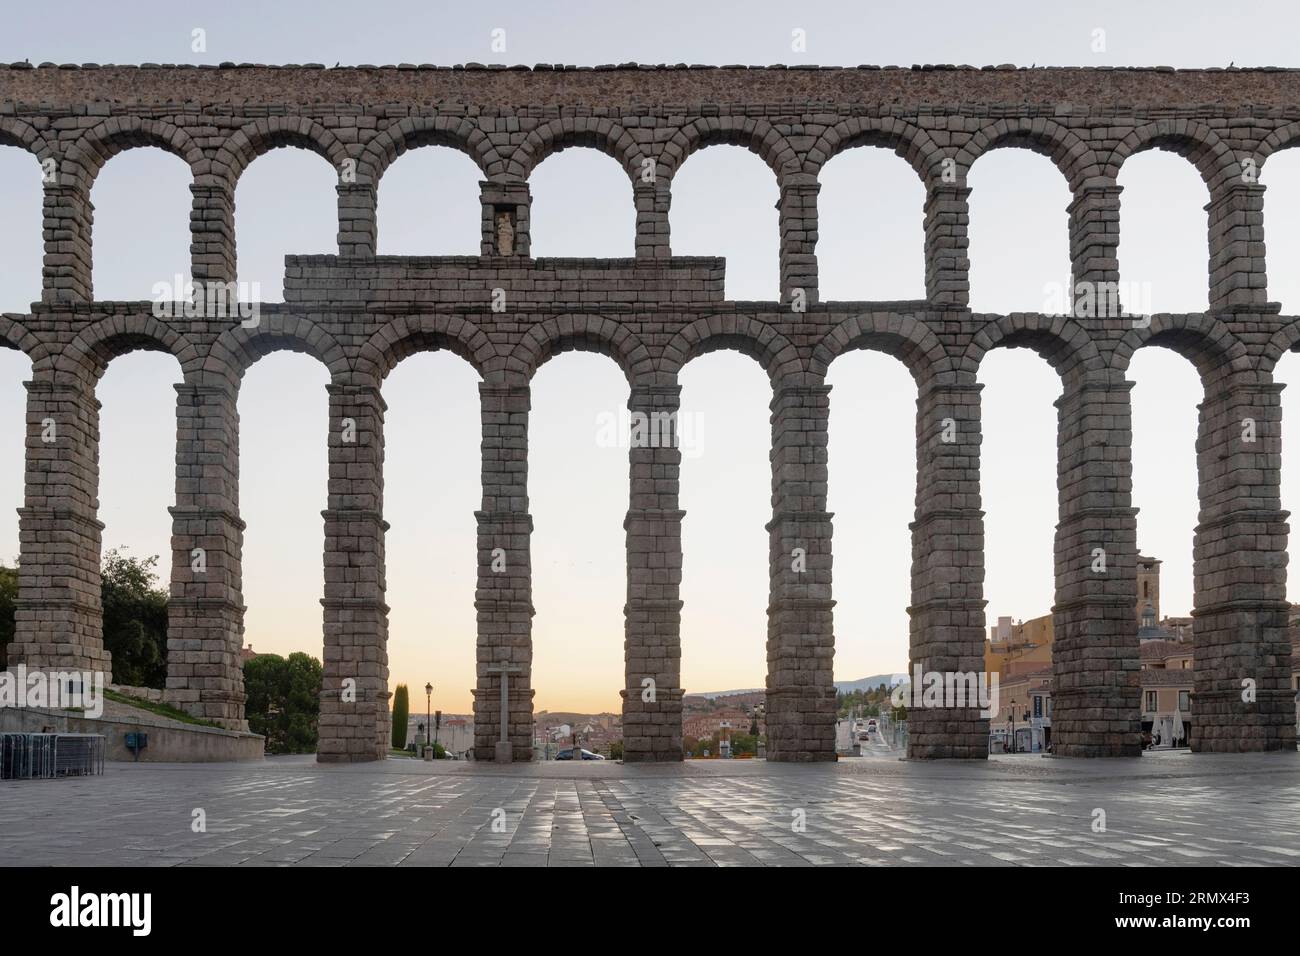 Spain, Castile and Leon, Segovia, Pre dawn view of the Aqueduct of Segovia, a Roman aqueduct with 167 arches built around the first century AD to chan Stock Photo